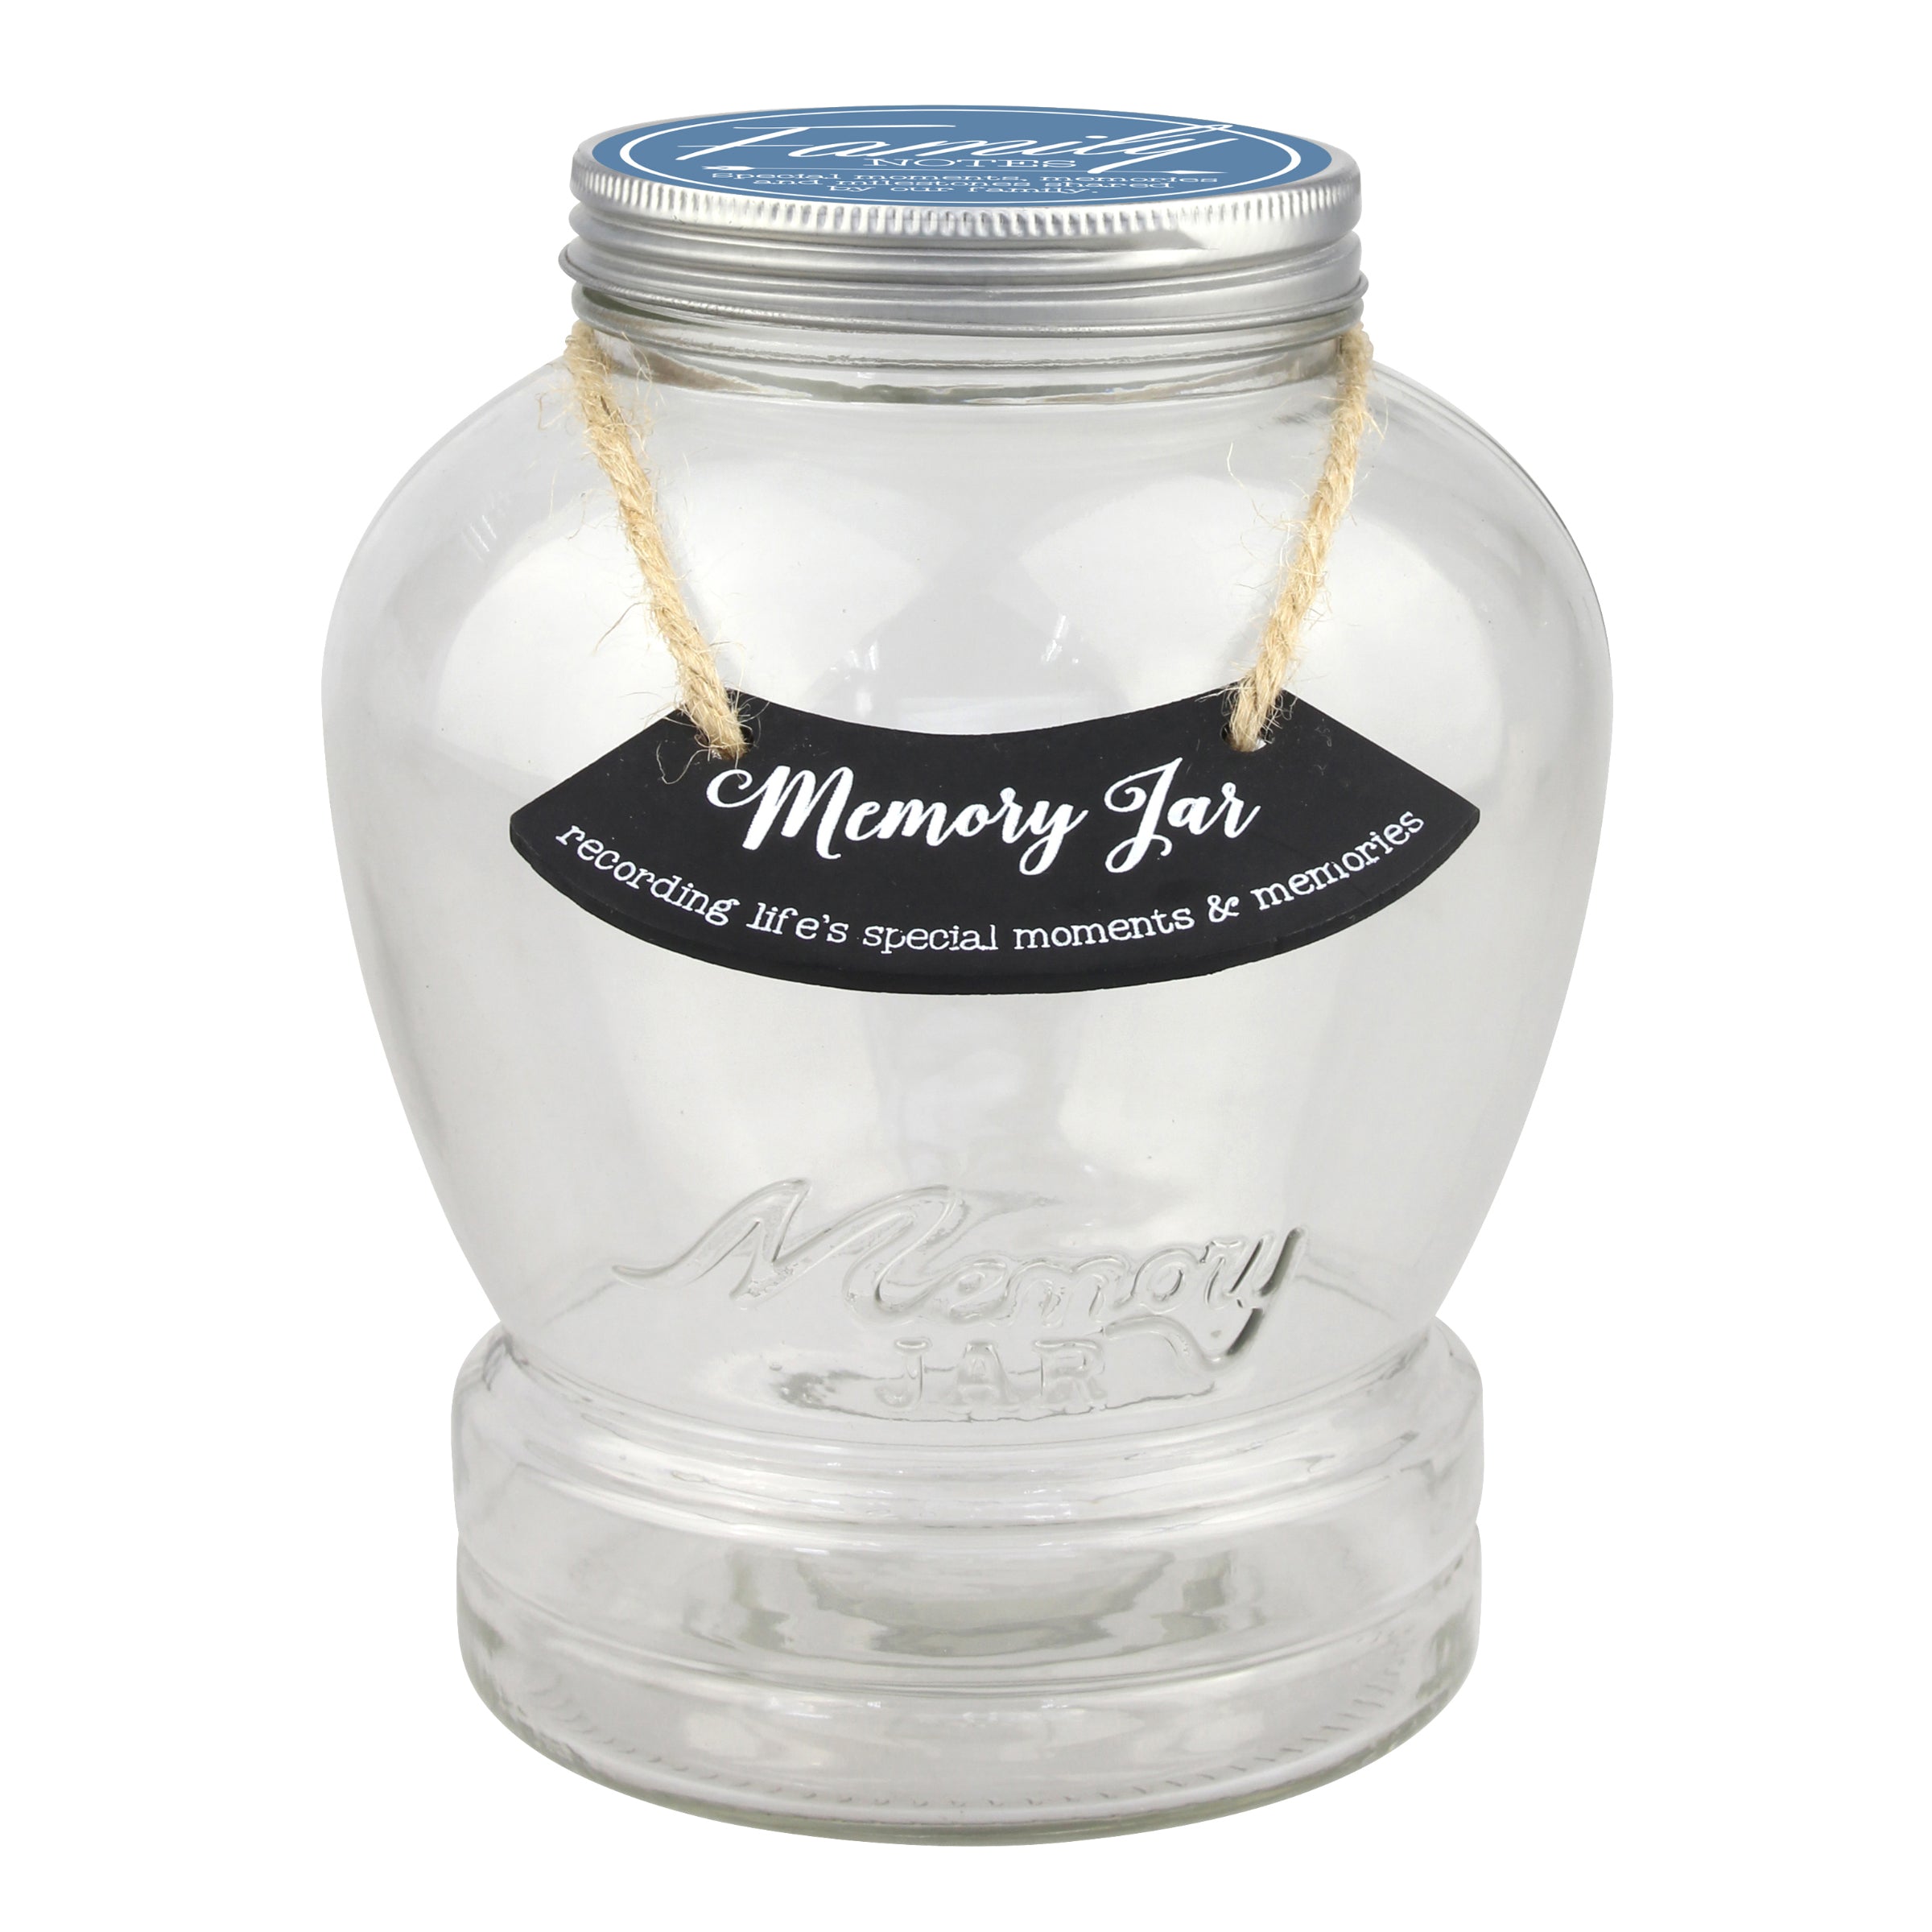 Top Shelf Family Memory Jar With 180 Tickets, Pen, and Decorative Lid (WS)